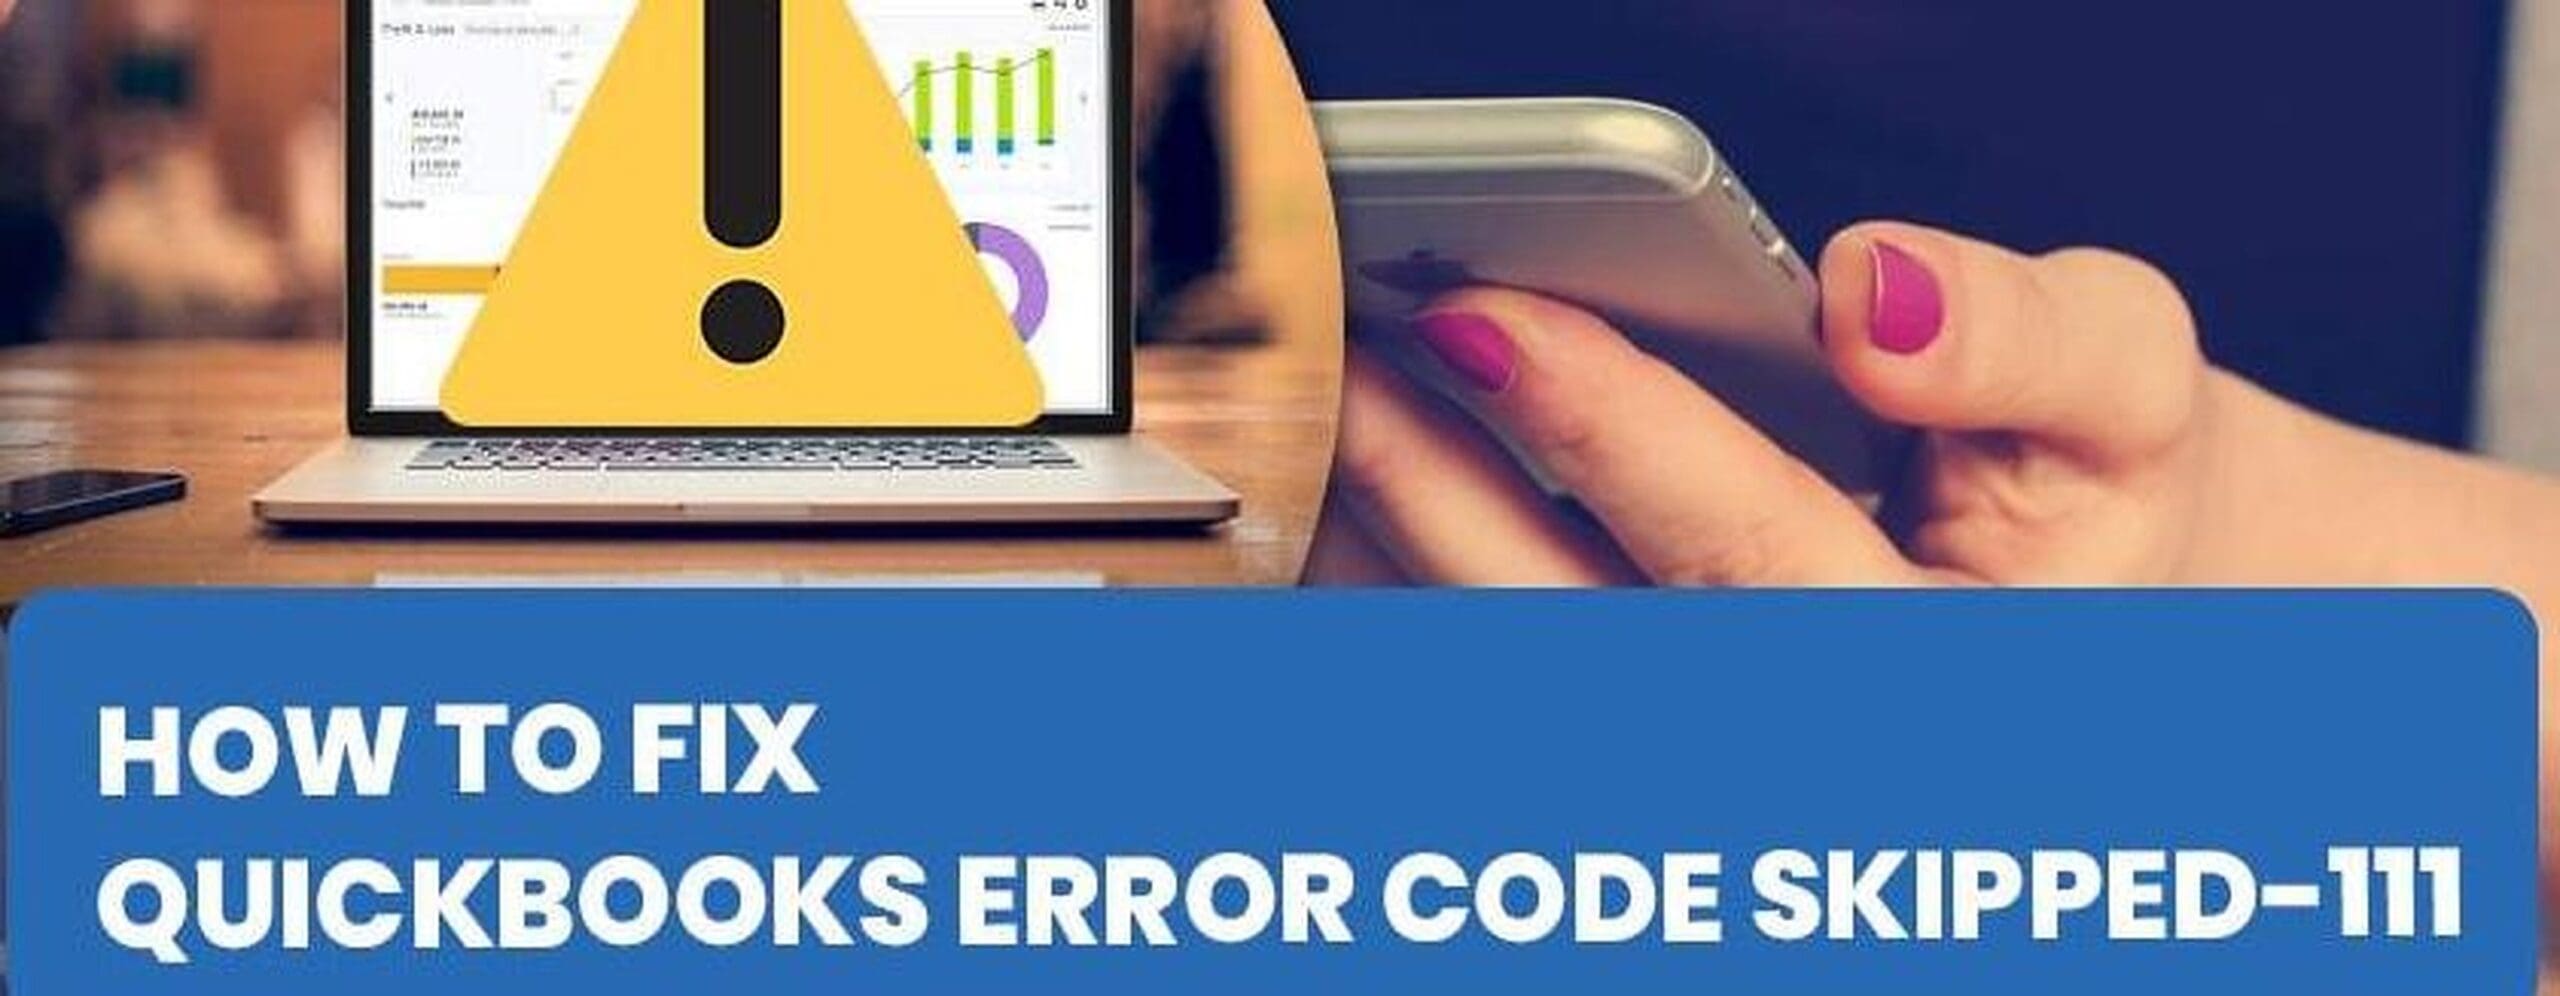 Step By Step Guidance to Fix QuickBooks Error Code Skipped 111